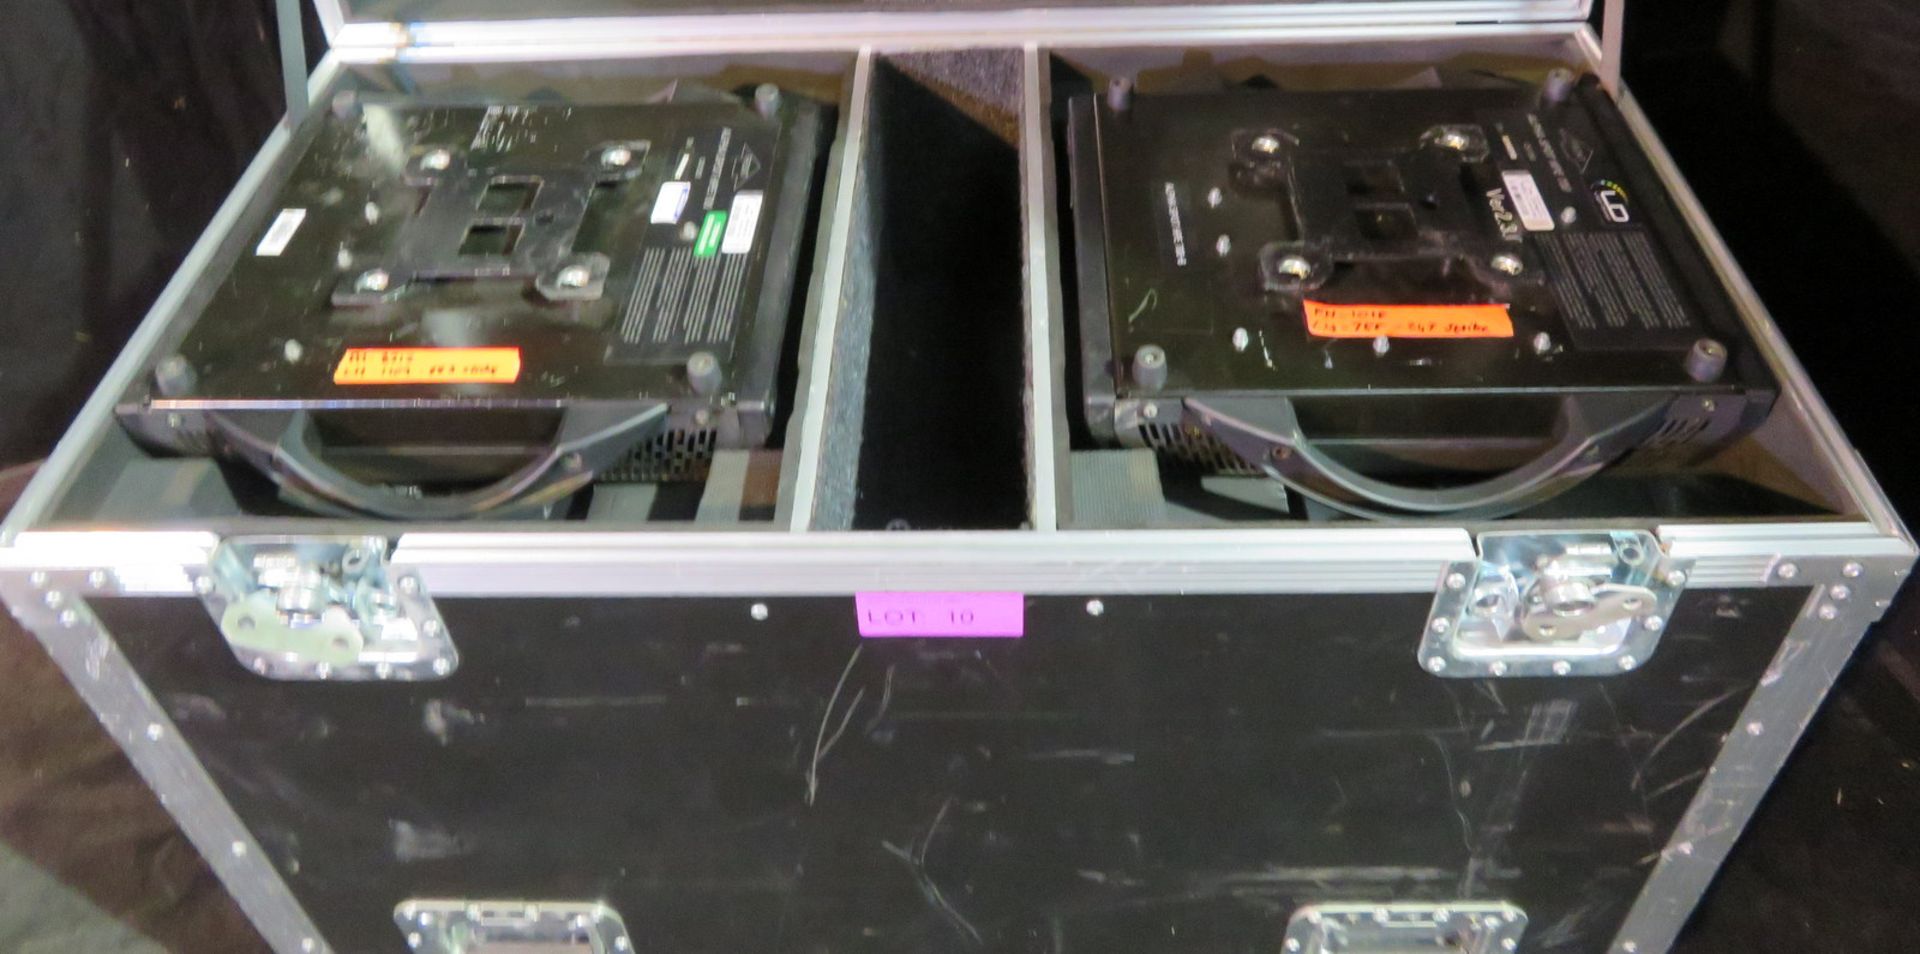 Pair of Clay Paky Alpha Spot HPE 700 in twin flightcase - Image 9 of 11